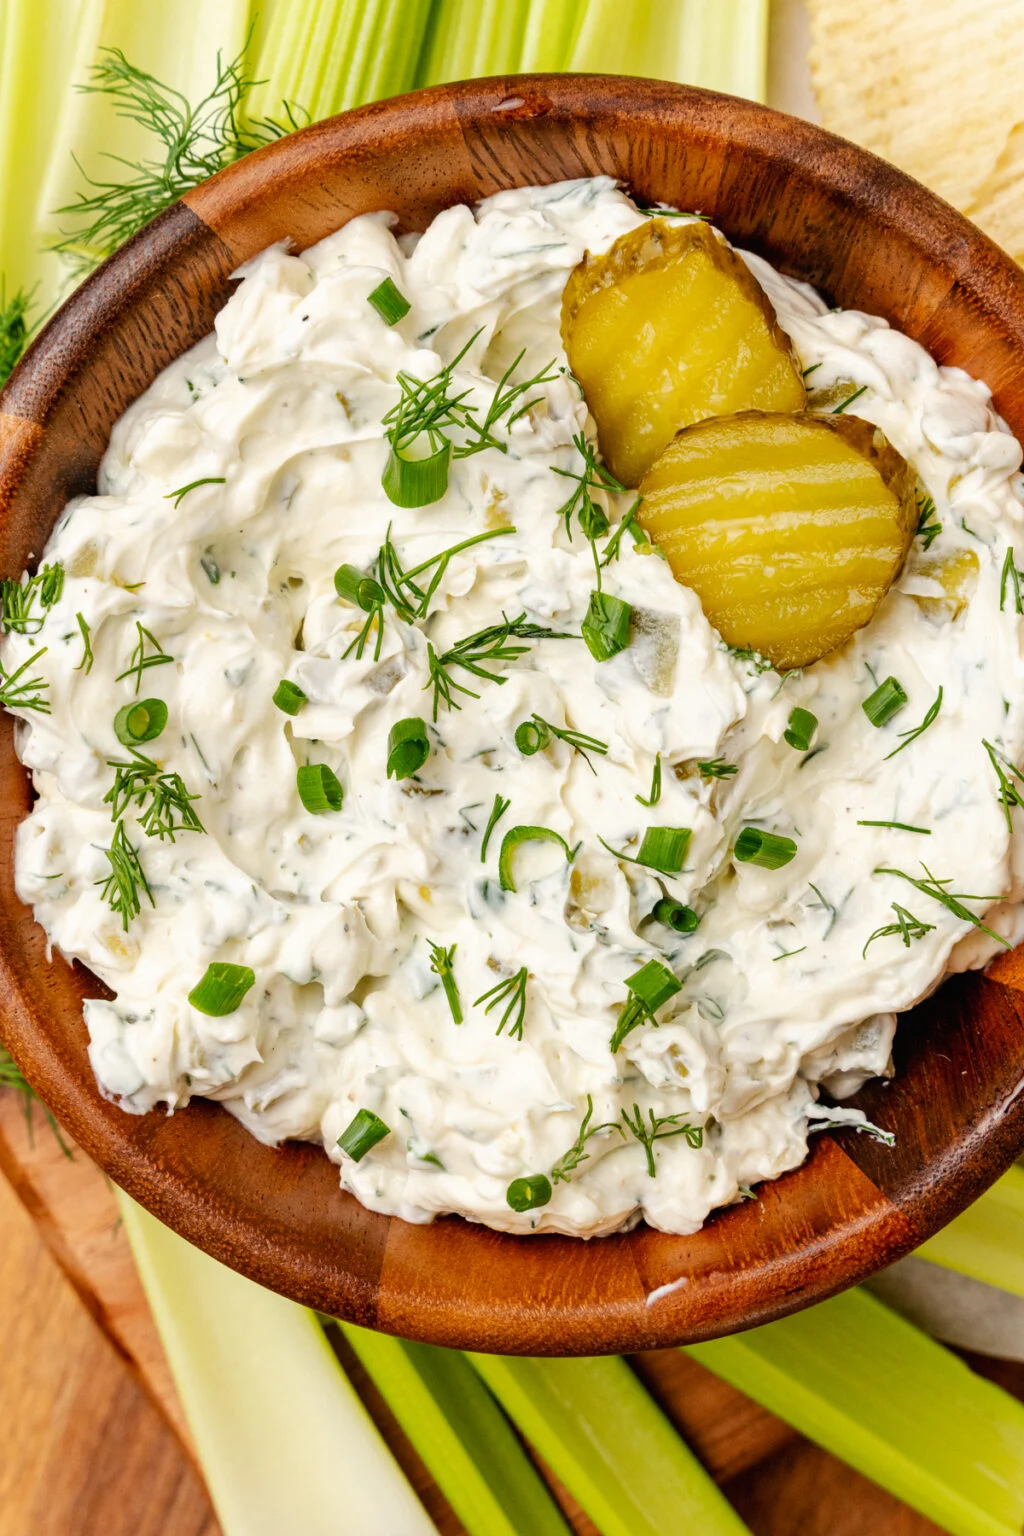 This photo shows a small wood bowl filled with dill pickle herb dip. 